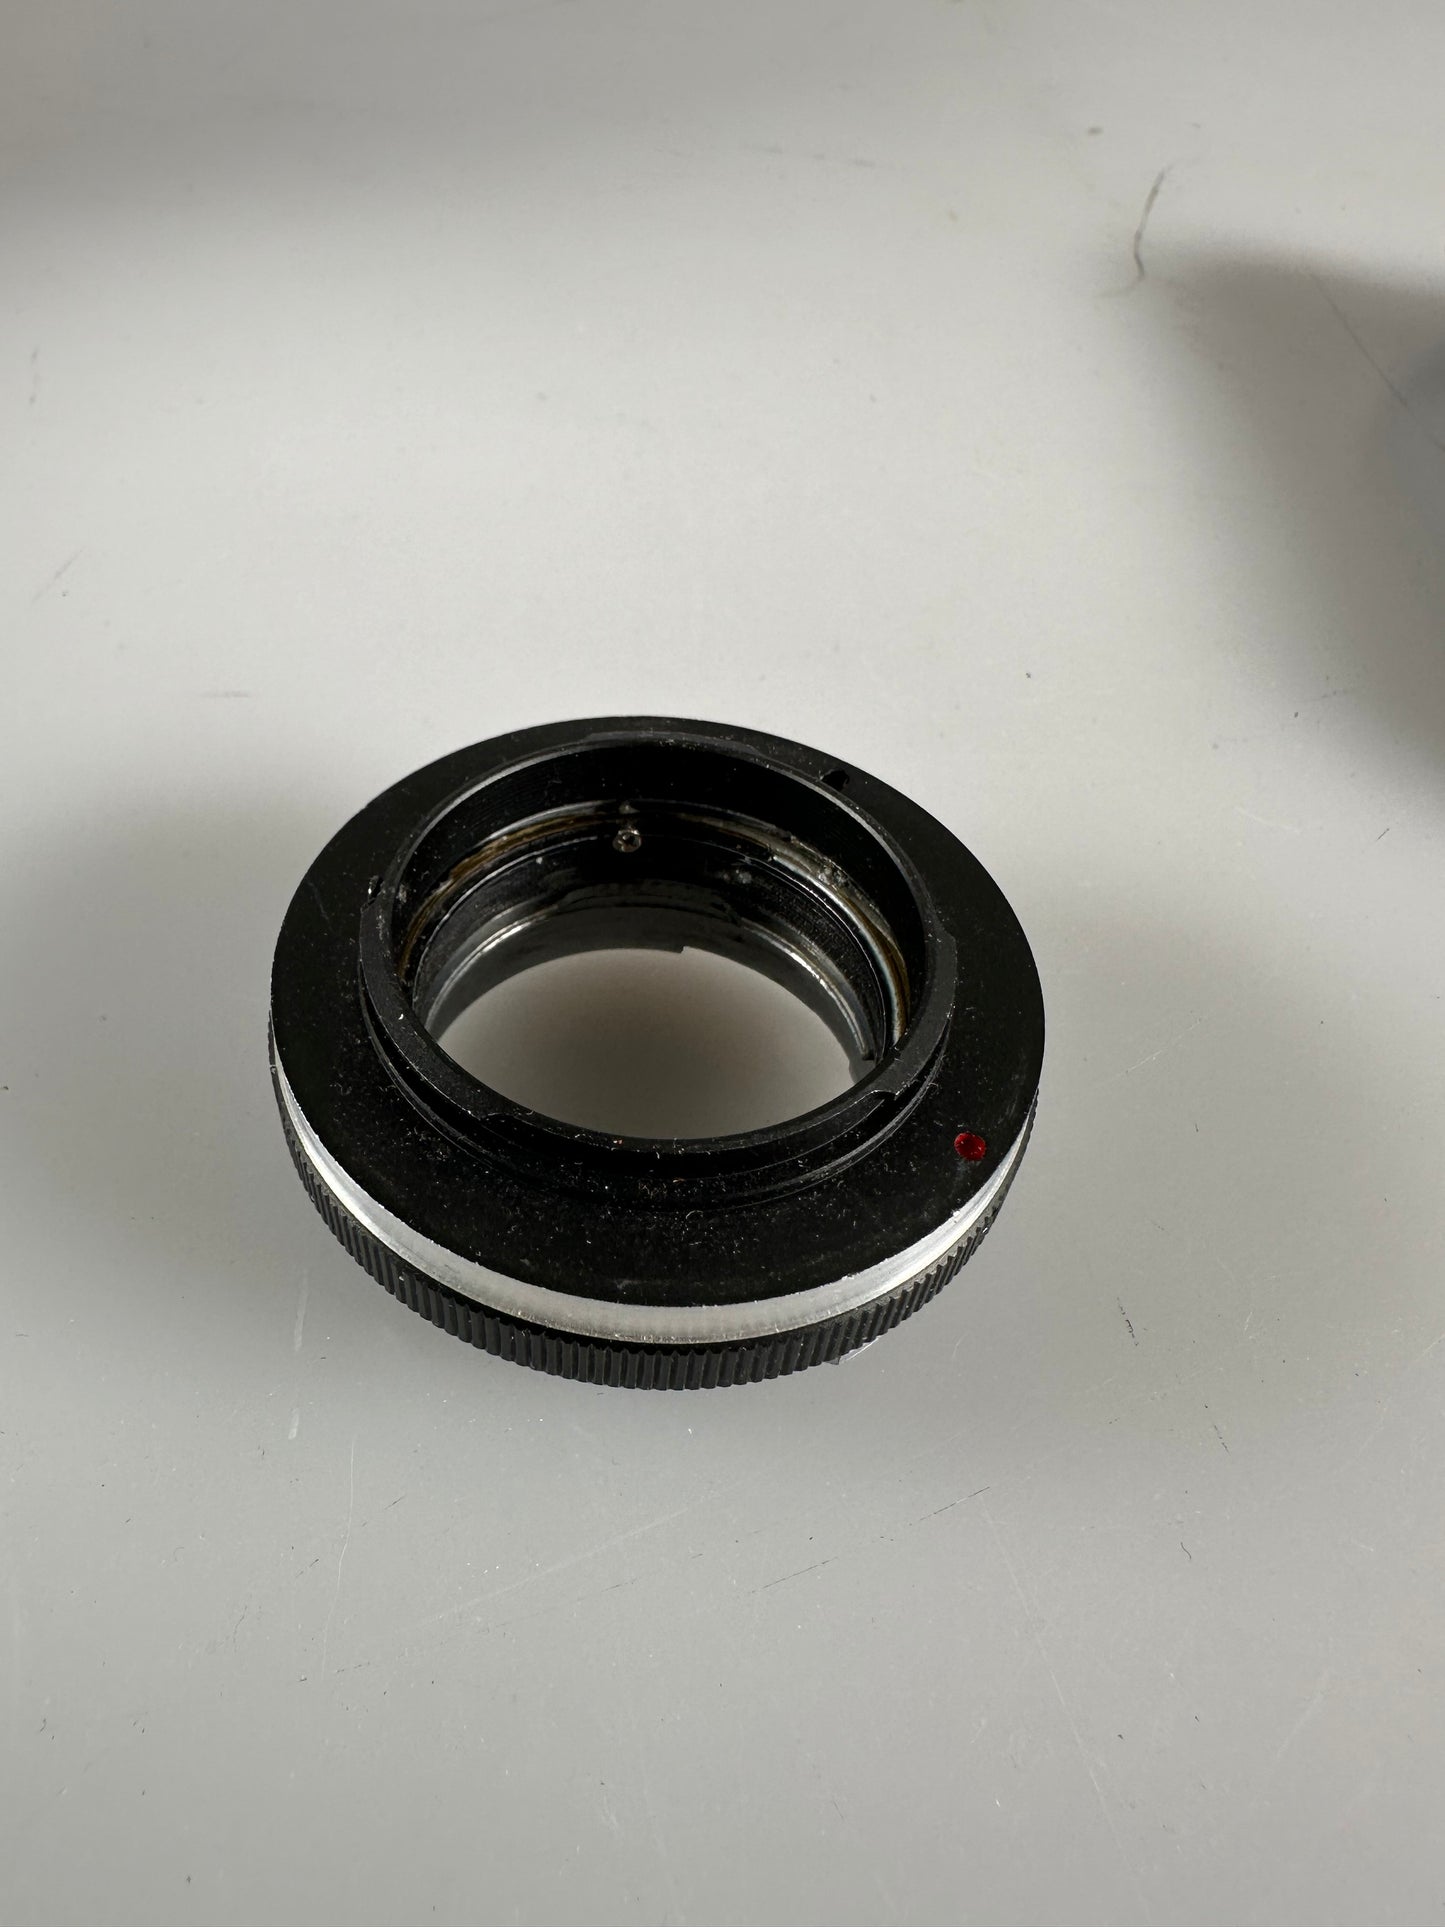 Contax RF mount to Leica M helical mount rangefinder adapter